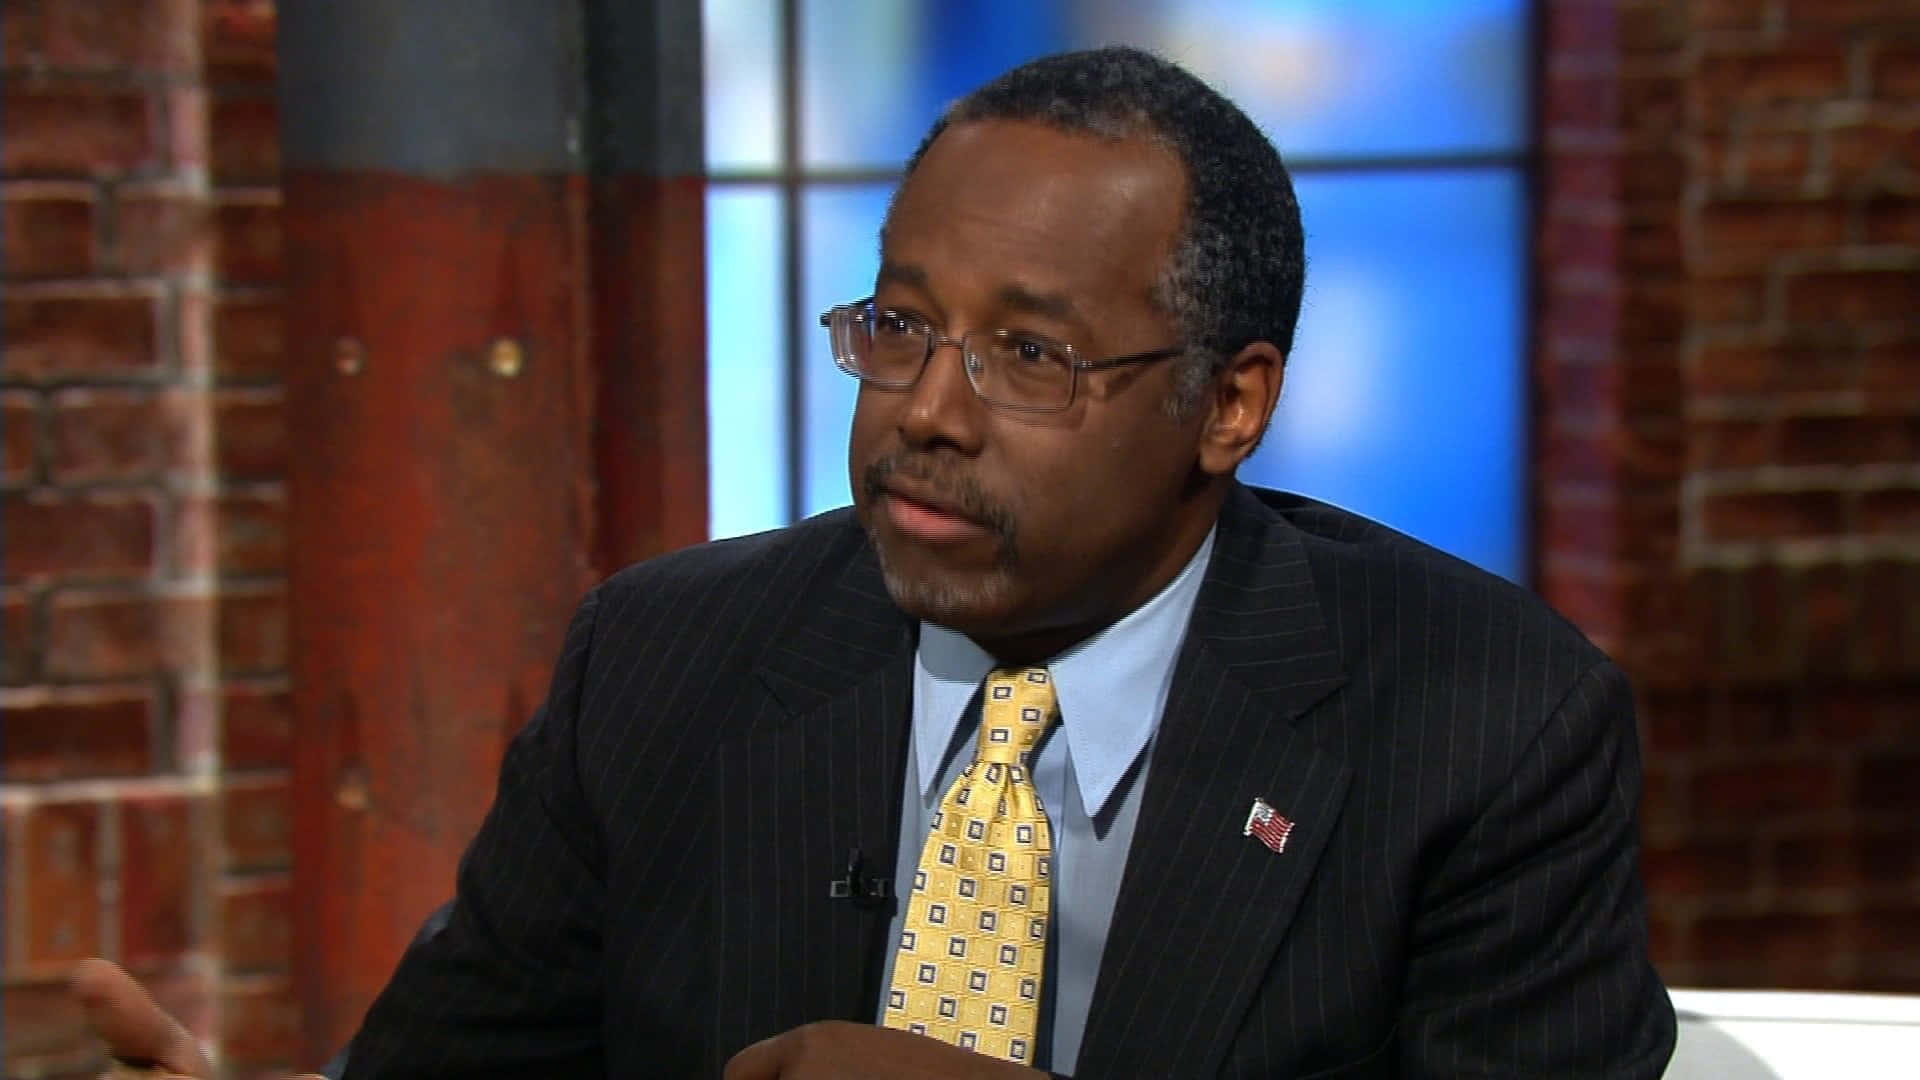 "Dr. Ben Carson attentively listening at a discussion event" Wallpaper